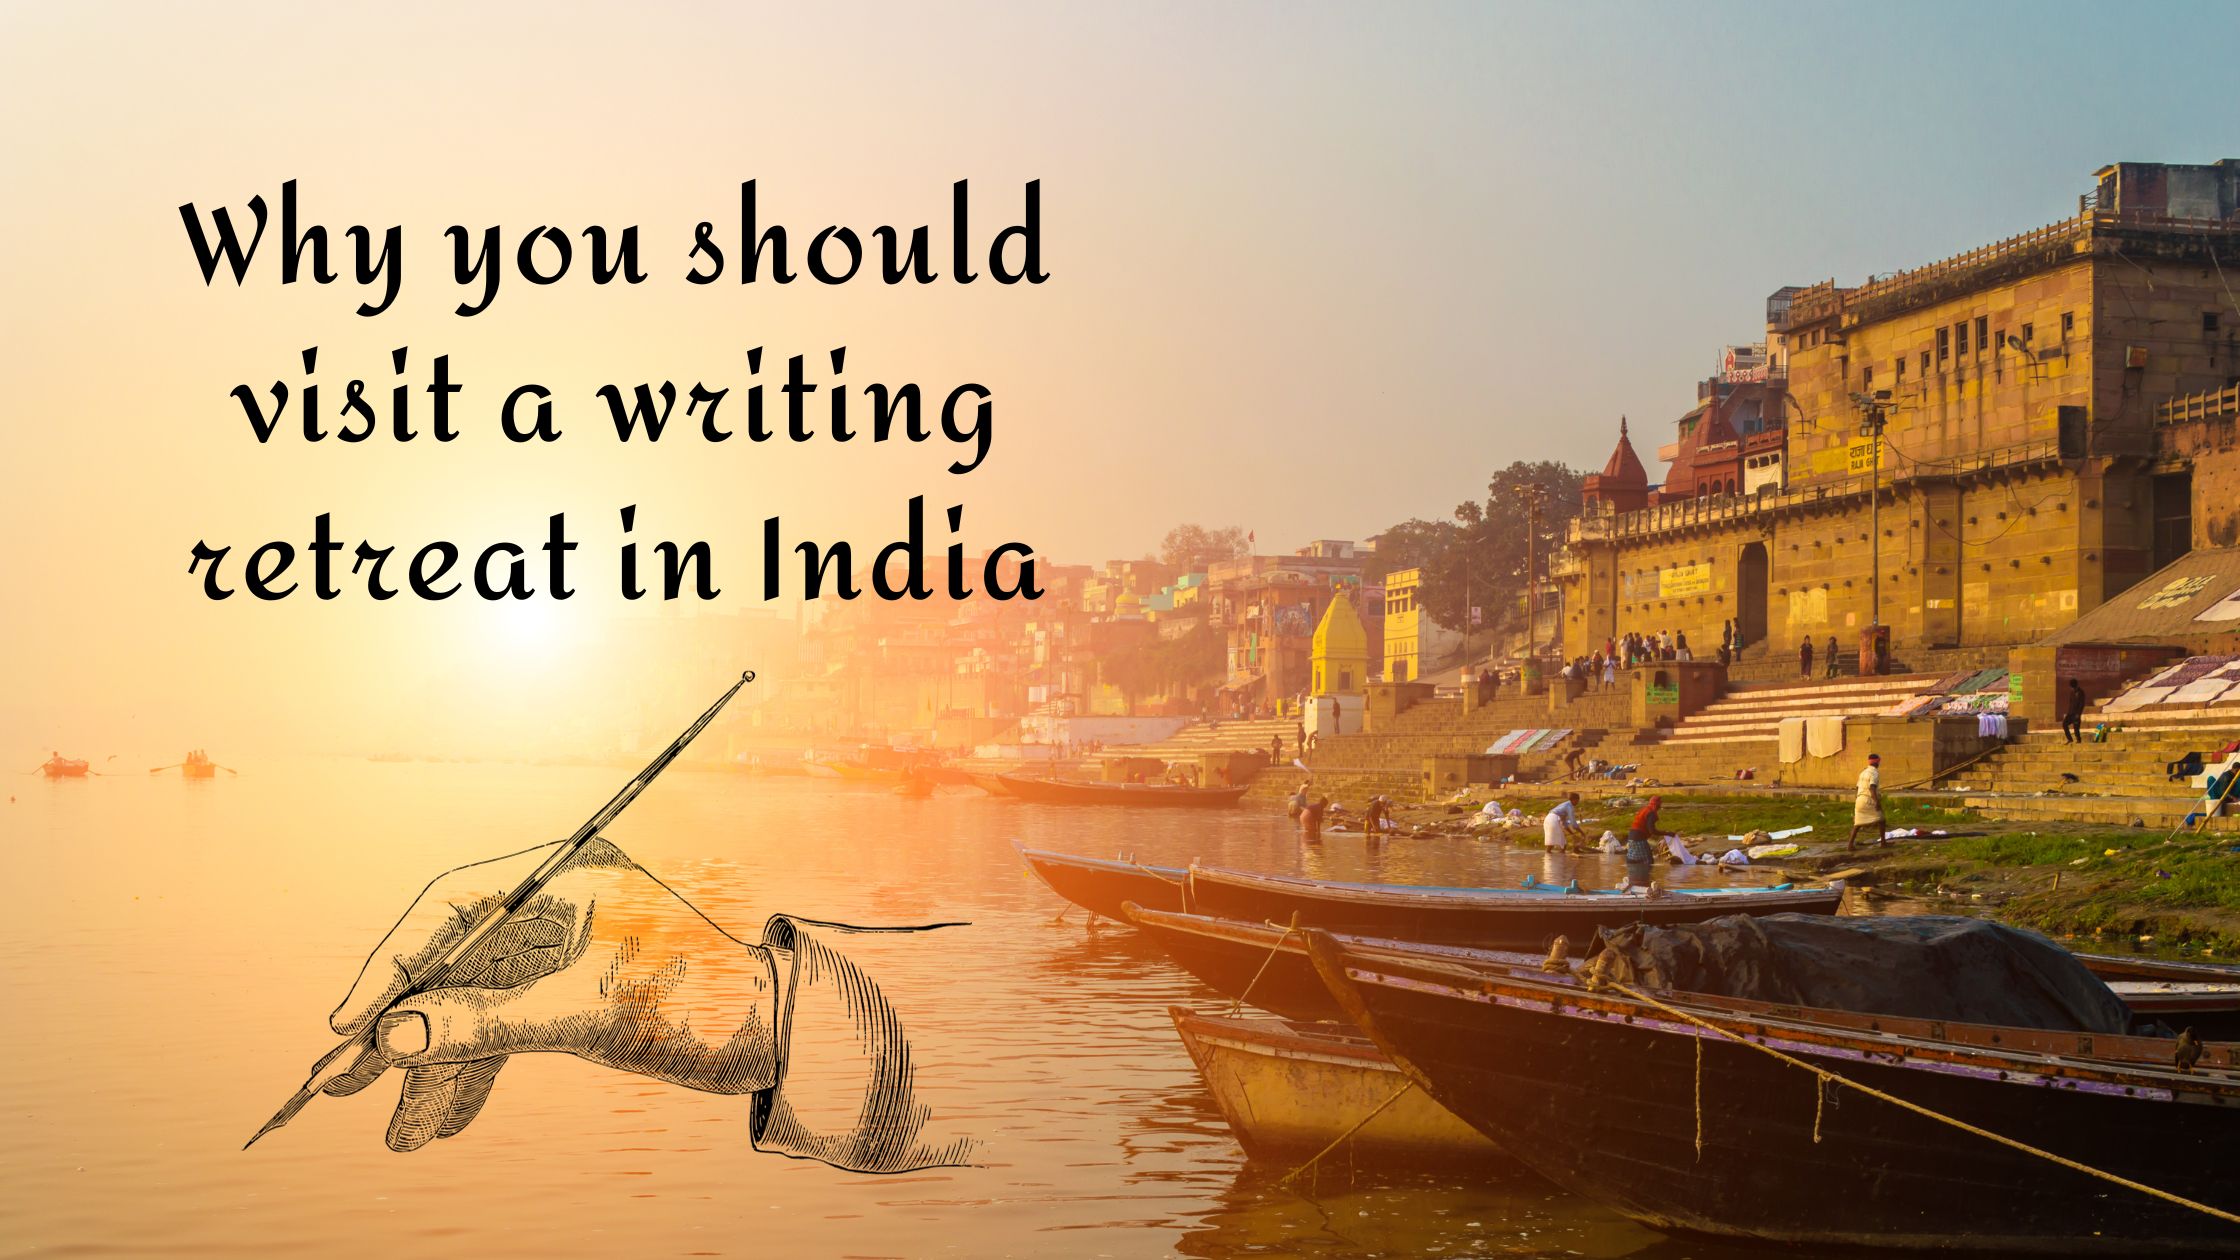 Why you should visit a writing retreat in India